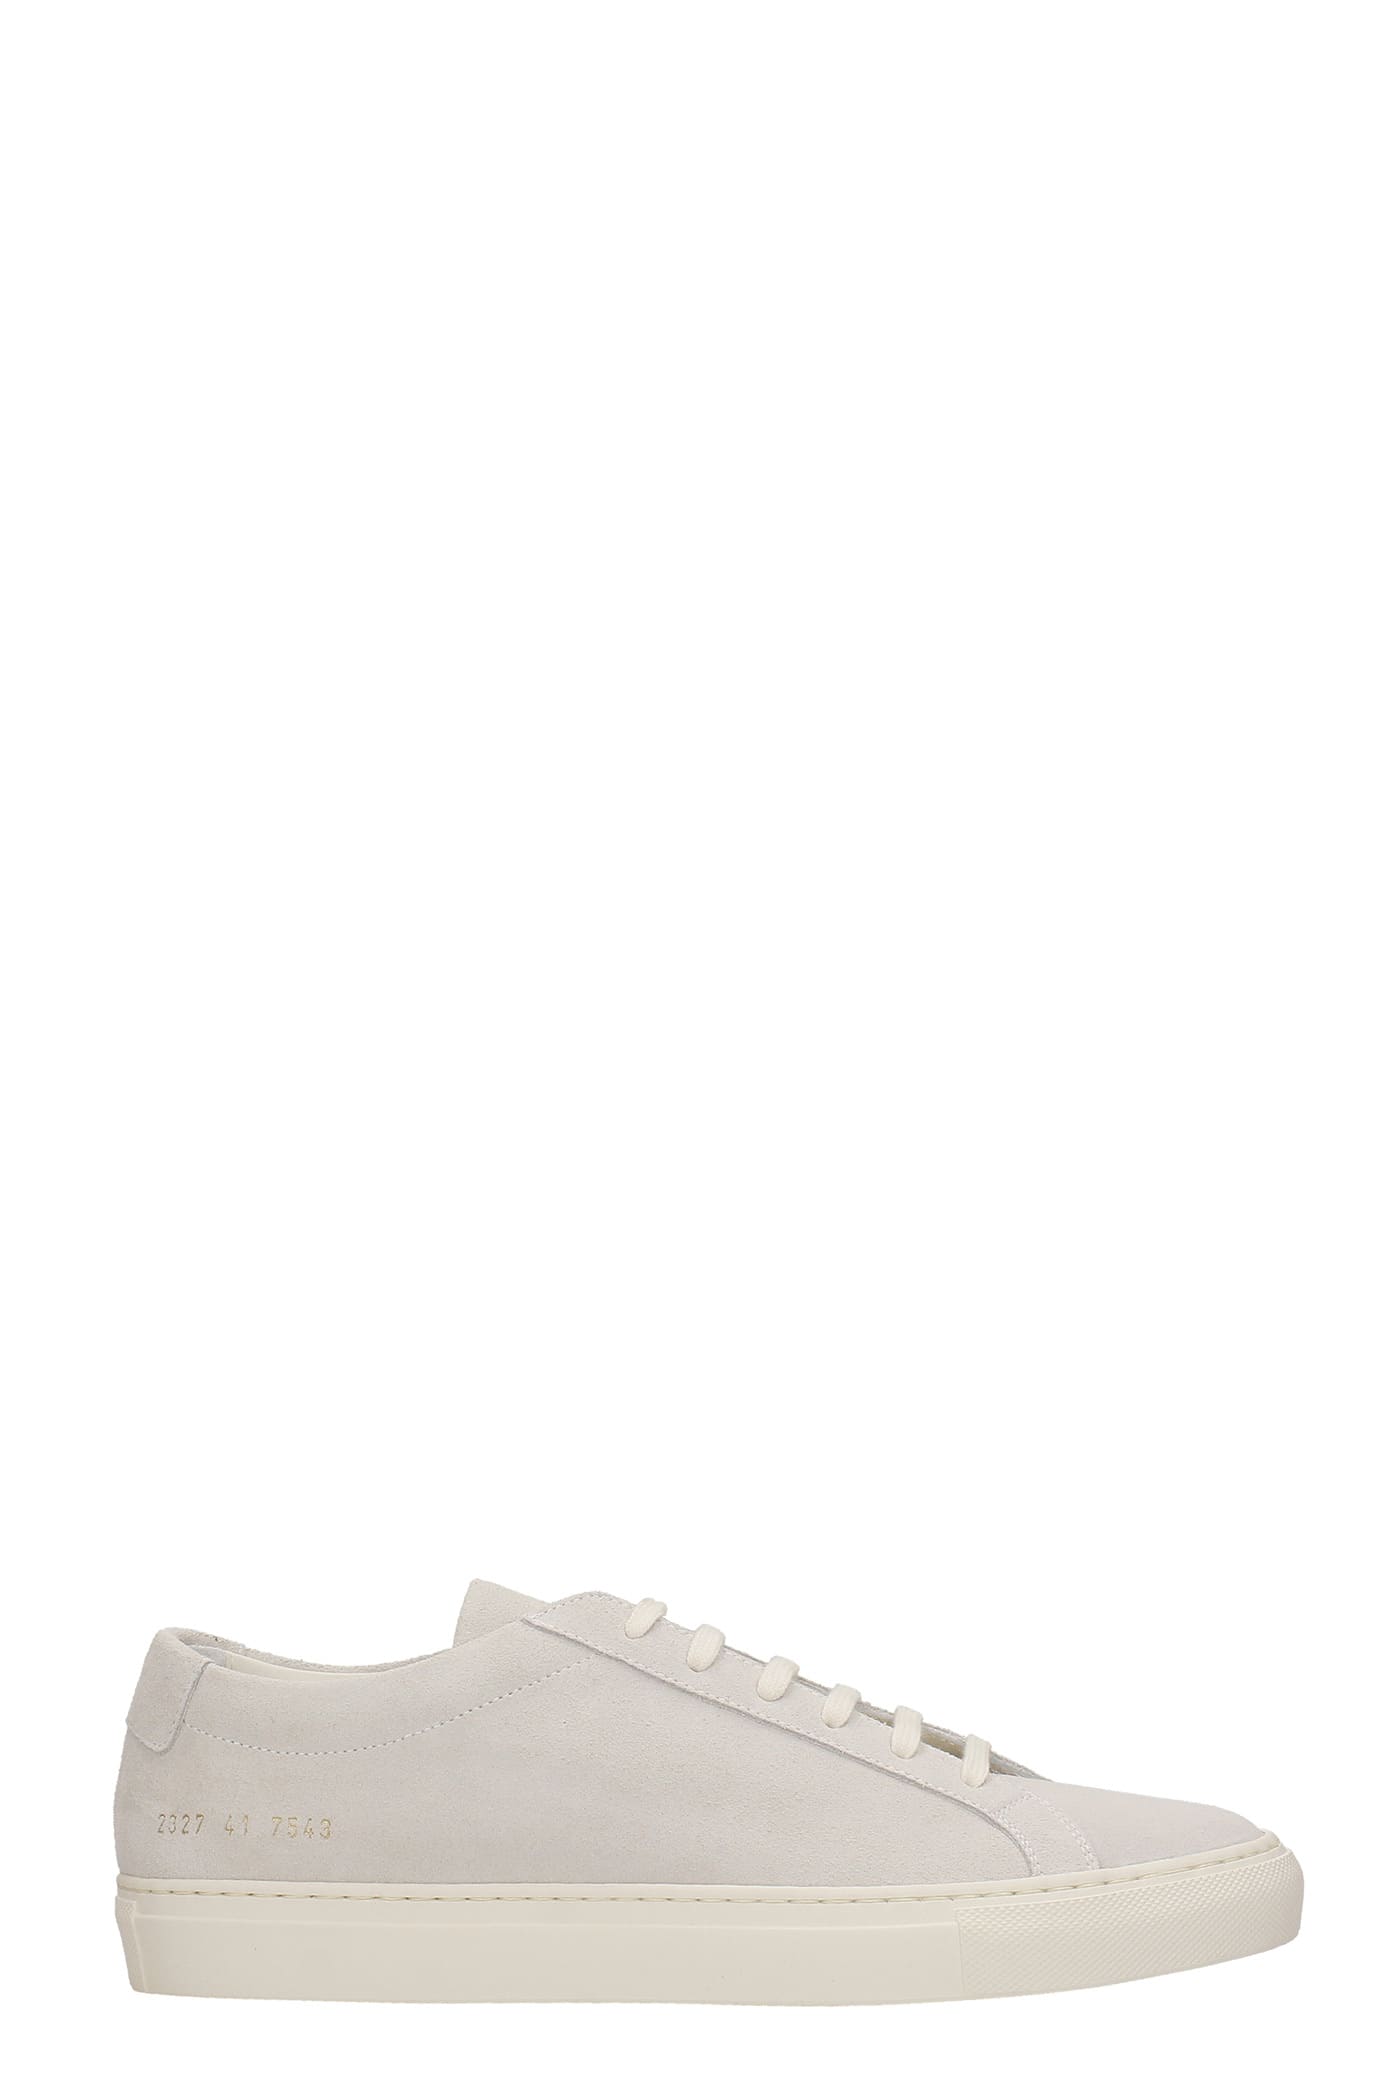 Common Projects Achille Sneakers In Grey Suede